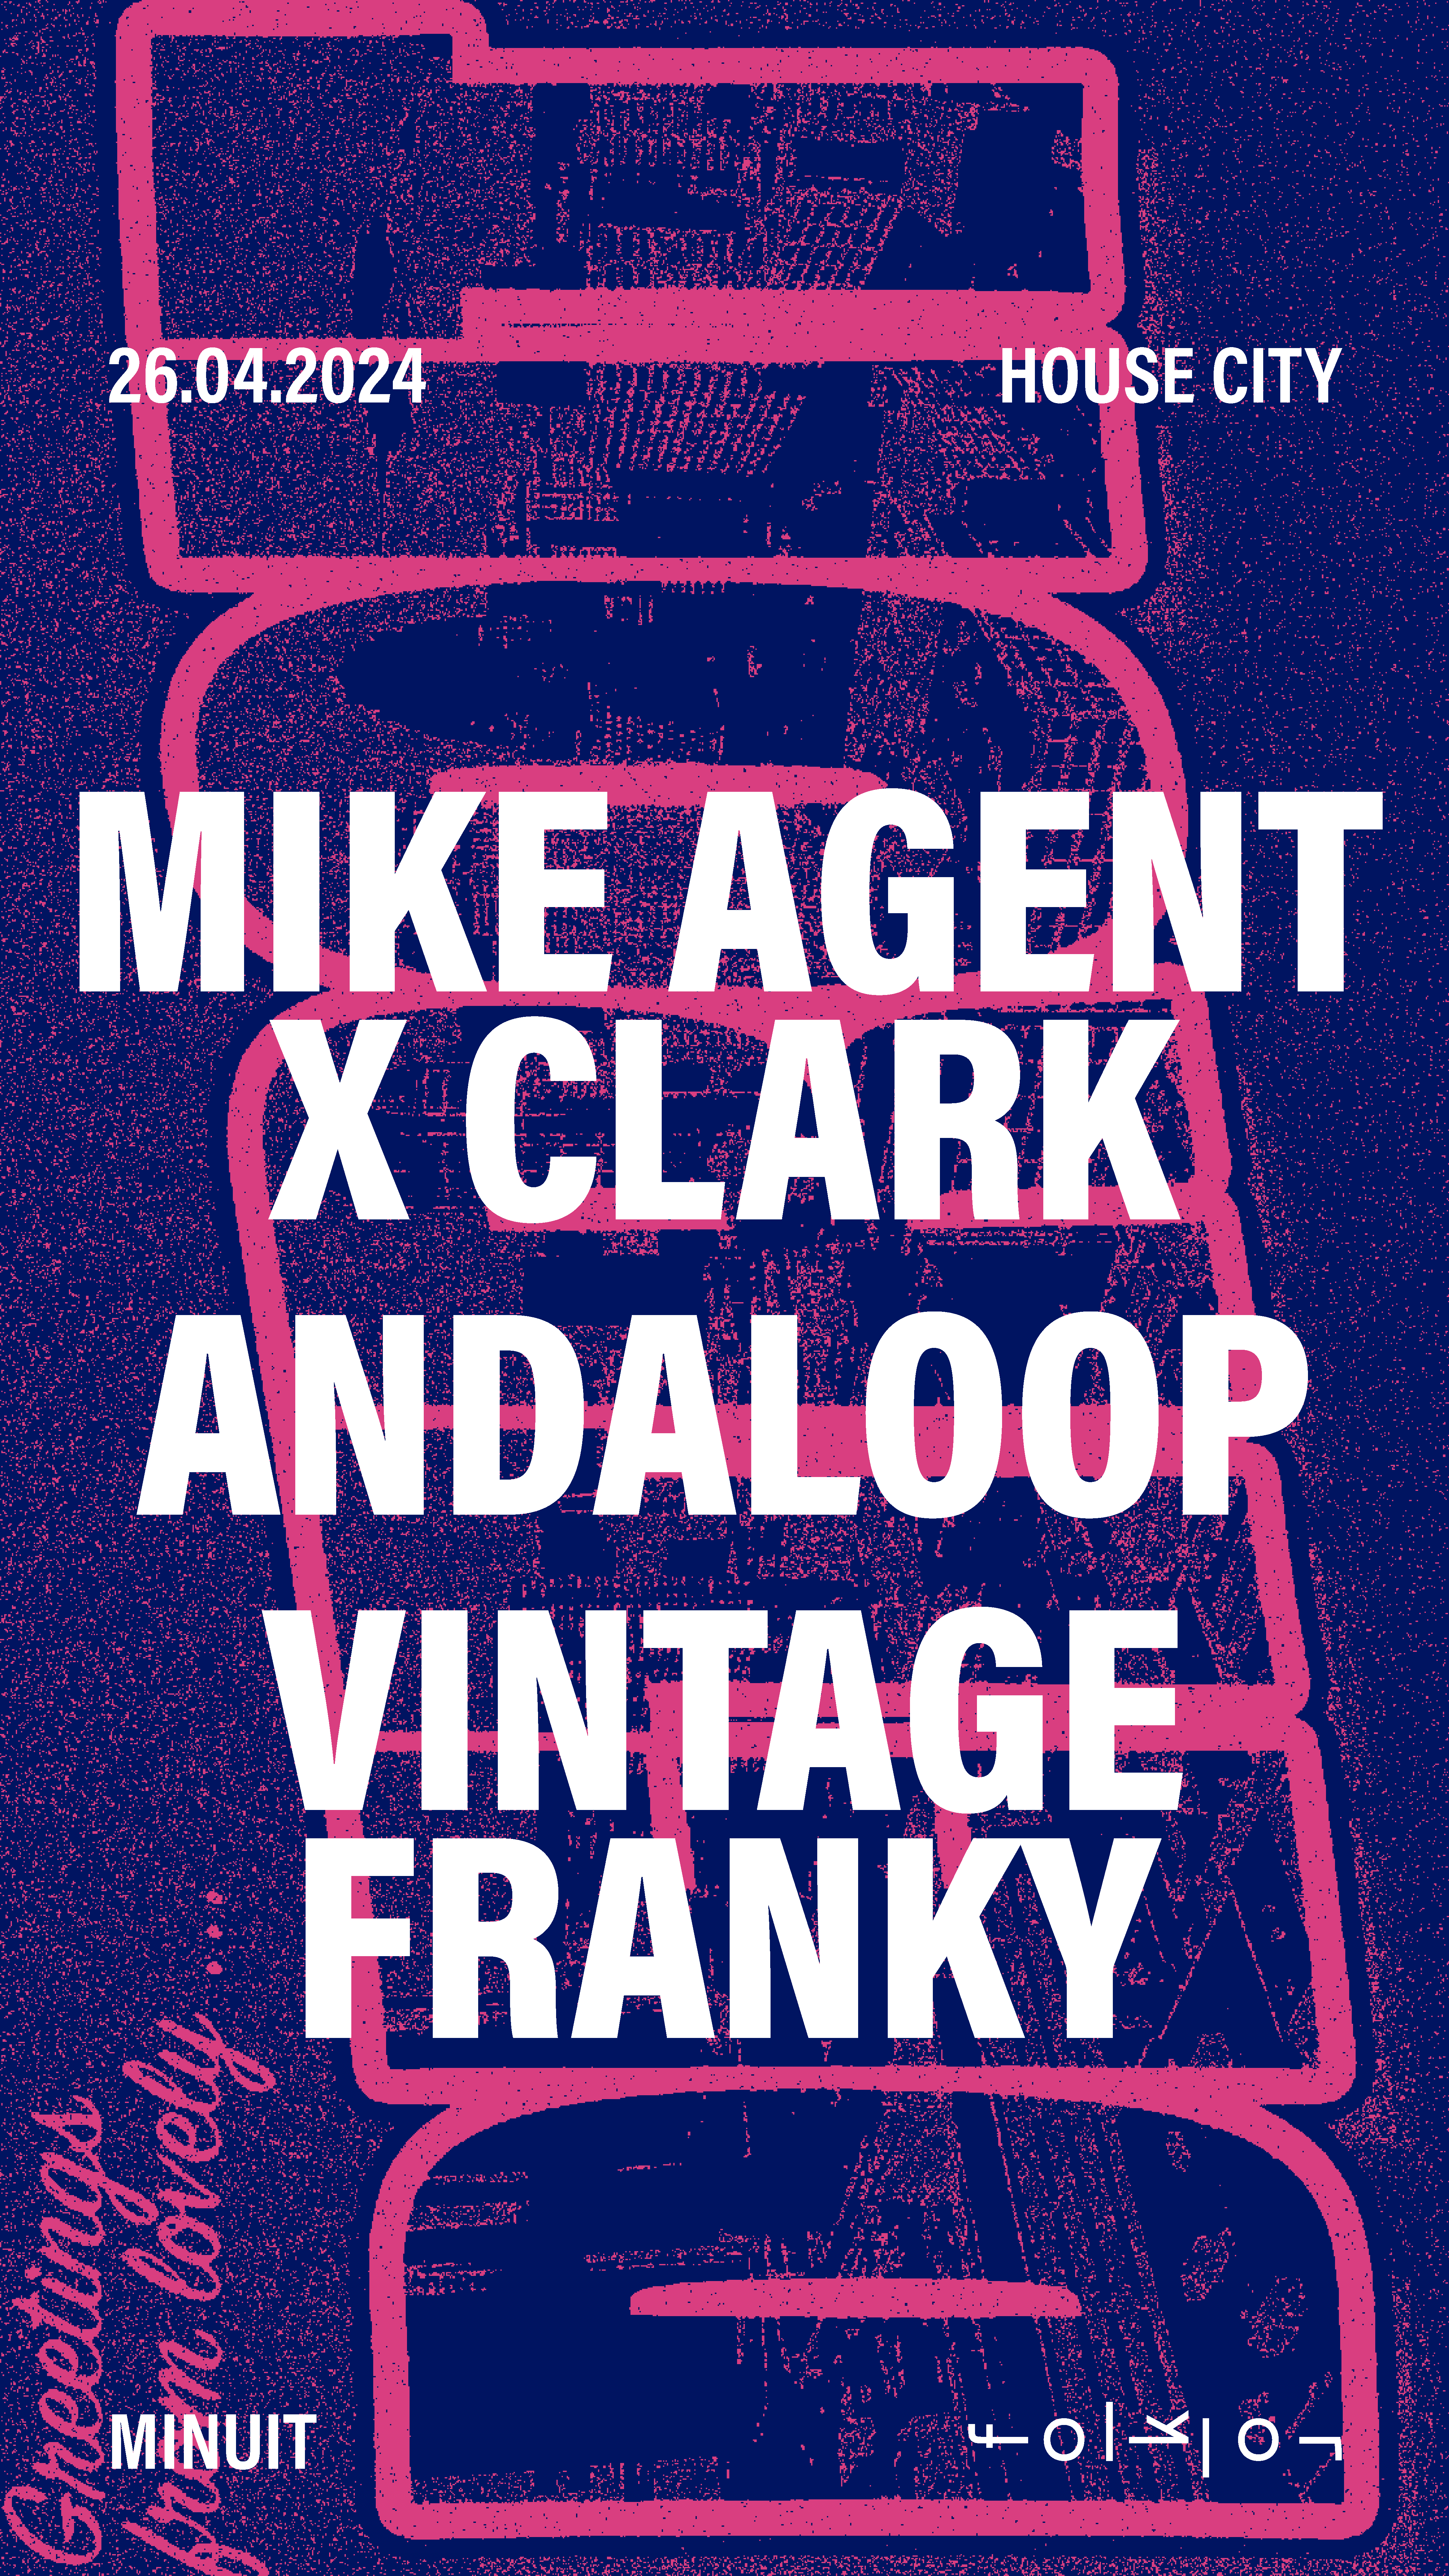 House City /// Mike Agent X Clark - Andaloop - Vintage Franky - フライヤー表